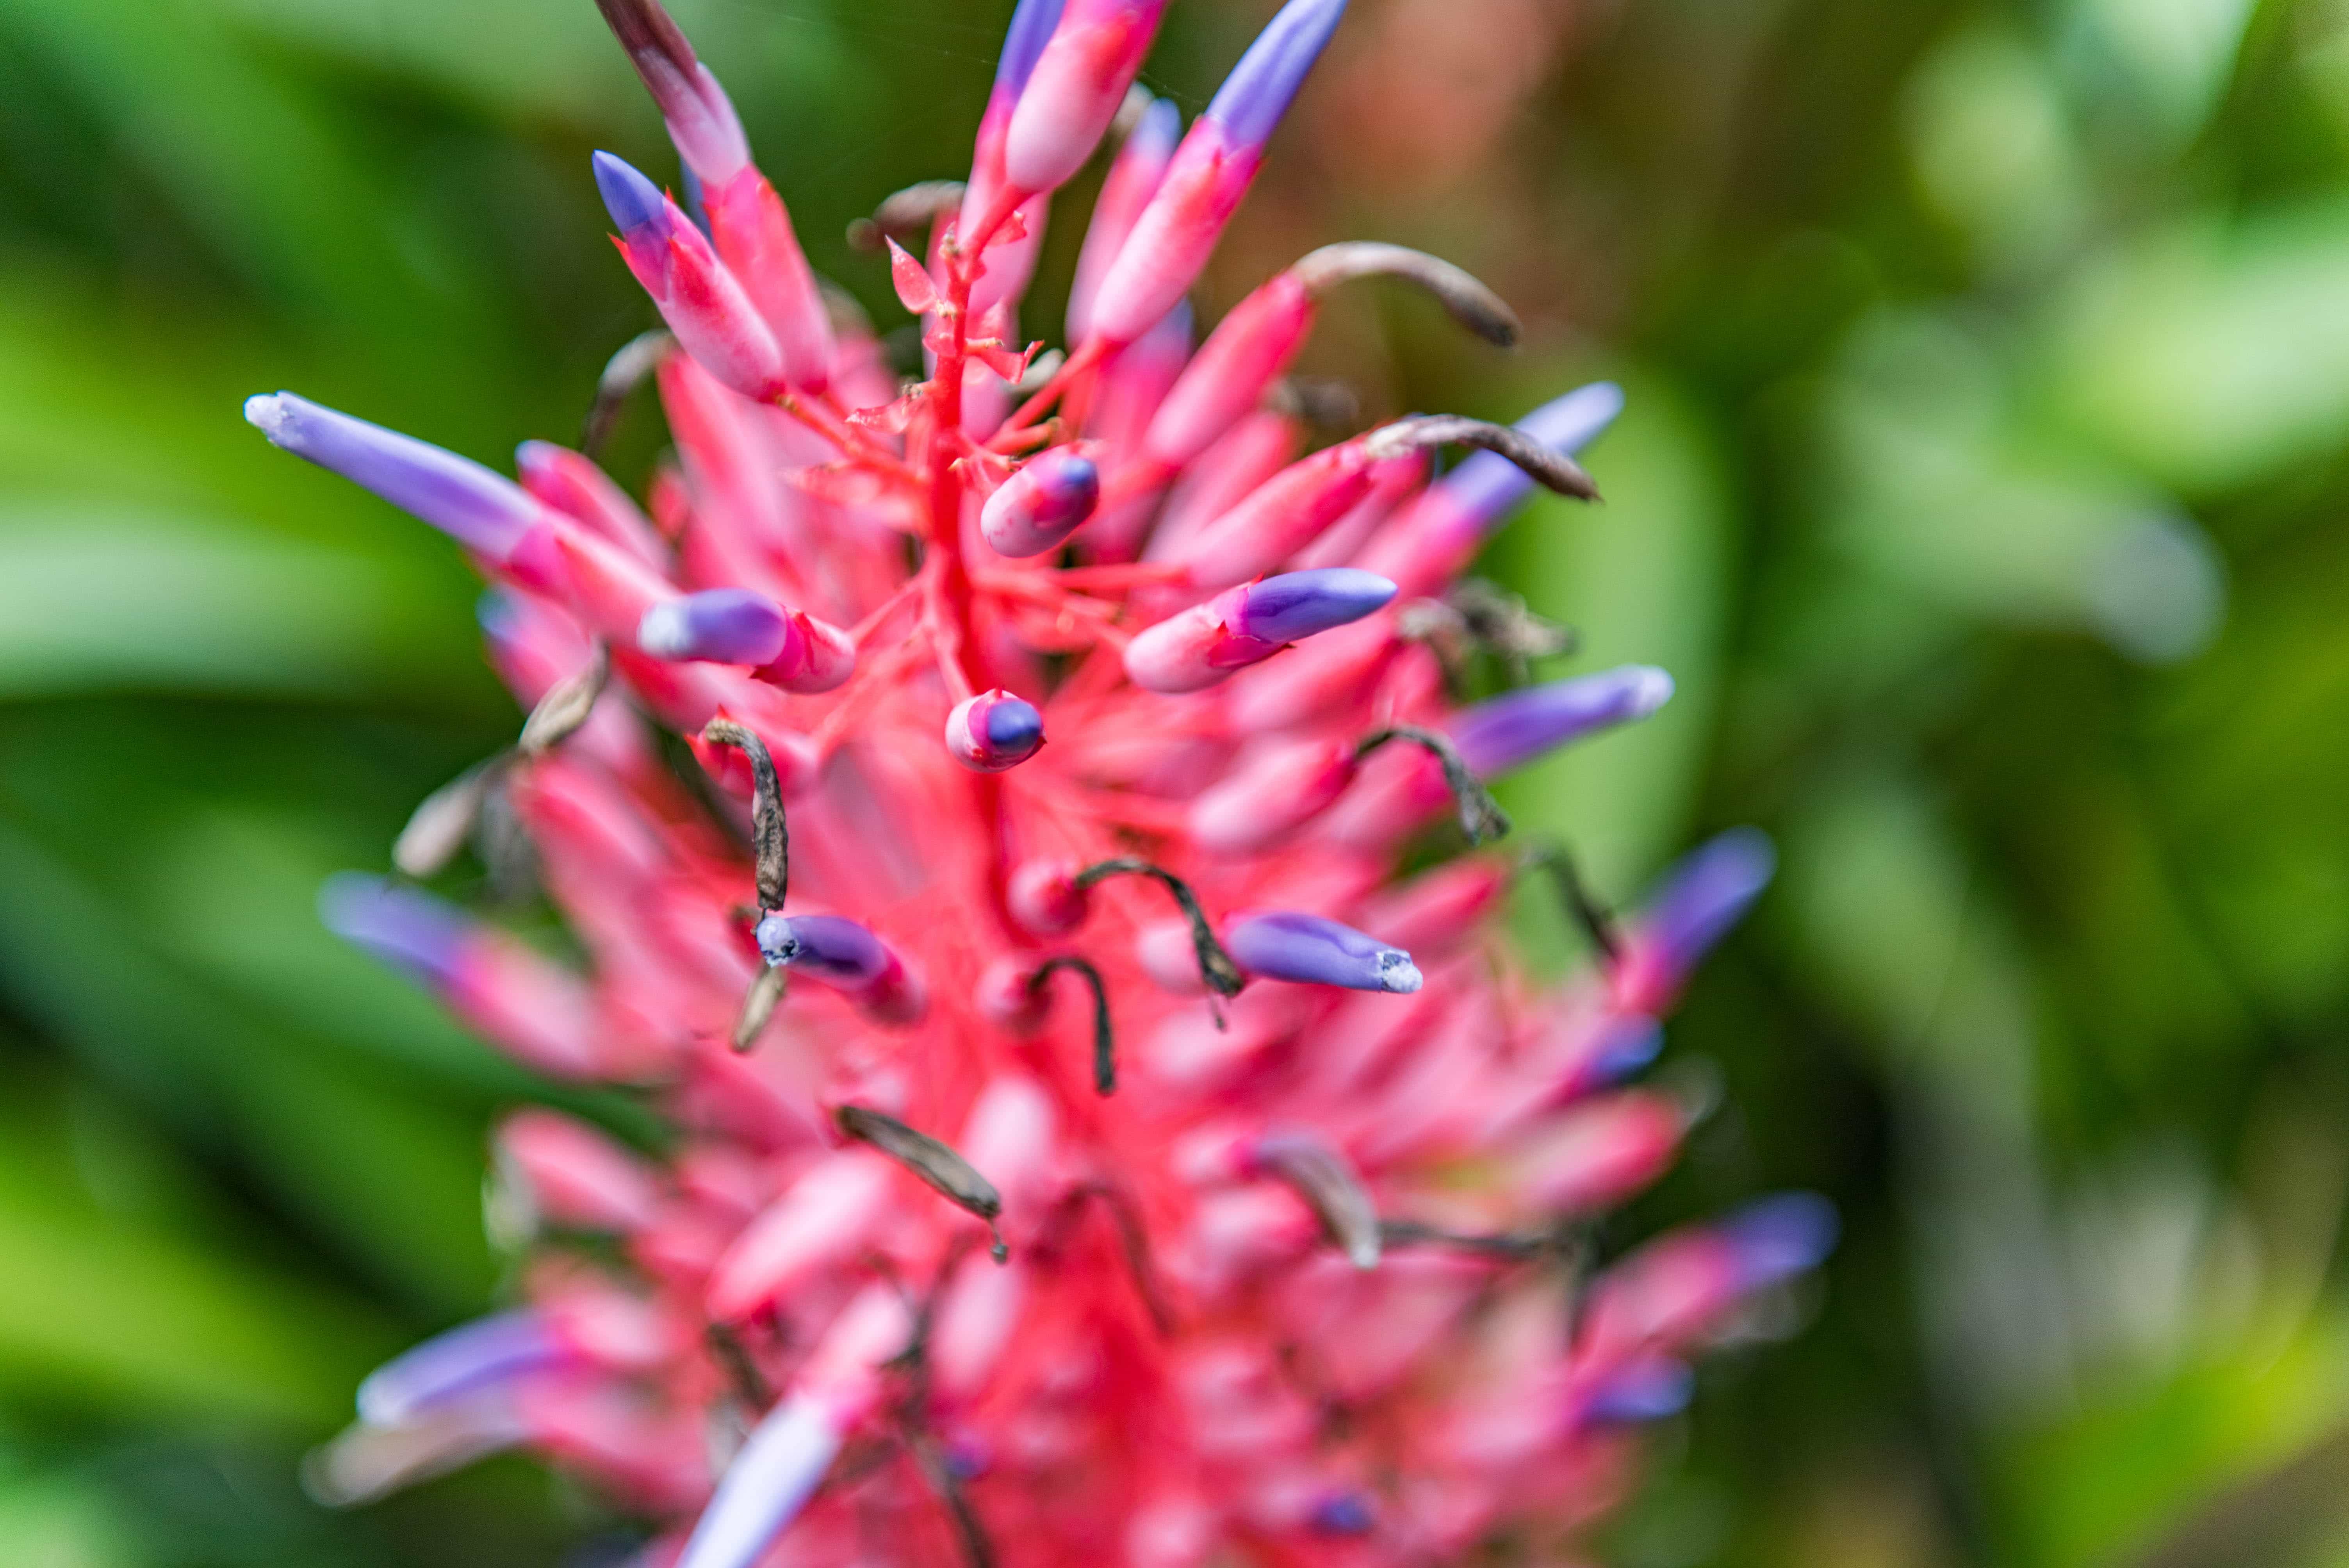 The garden overflows with a fireworks display of tropical color.